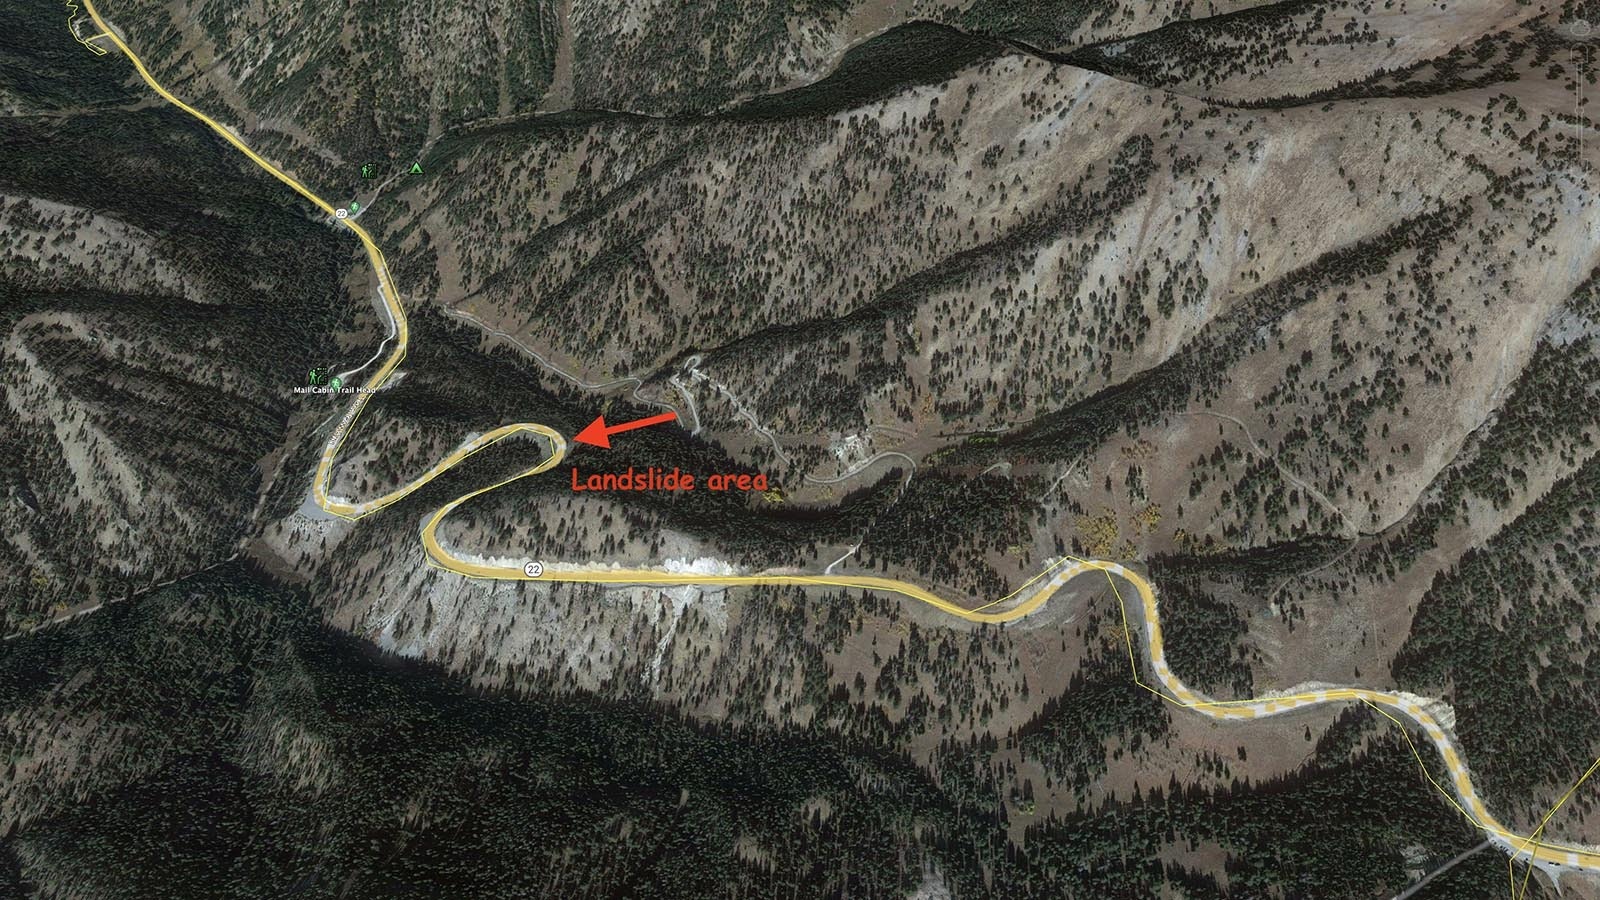 Teton Pass landslide at hairpin curve on the highway.